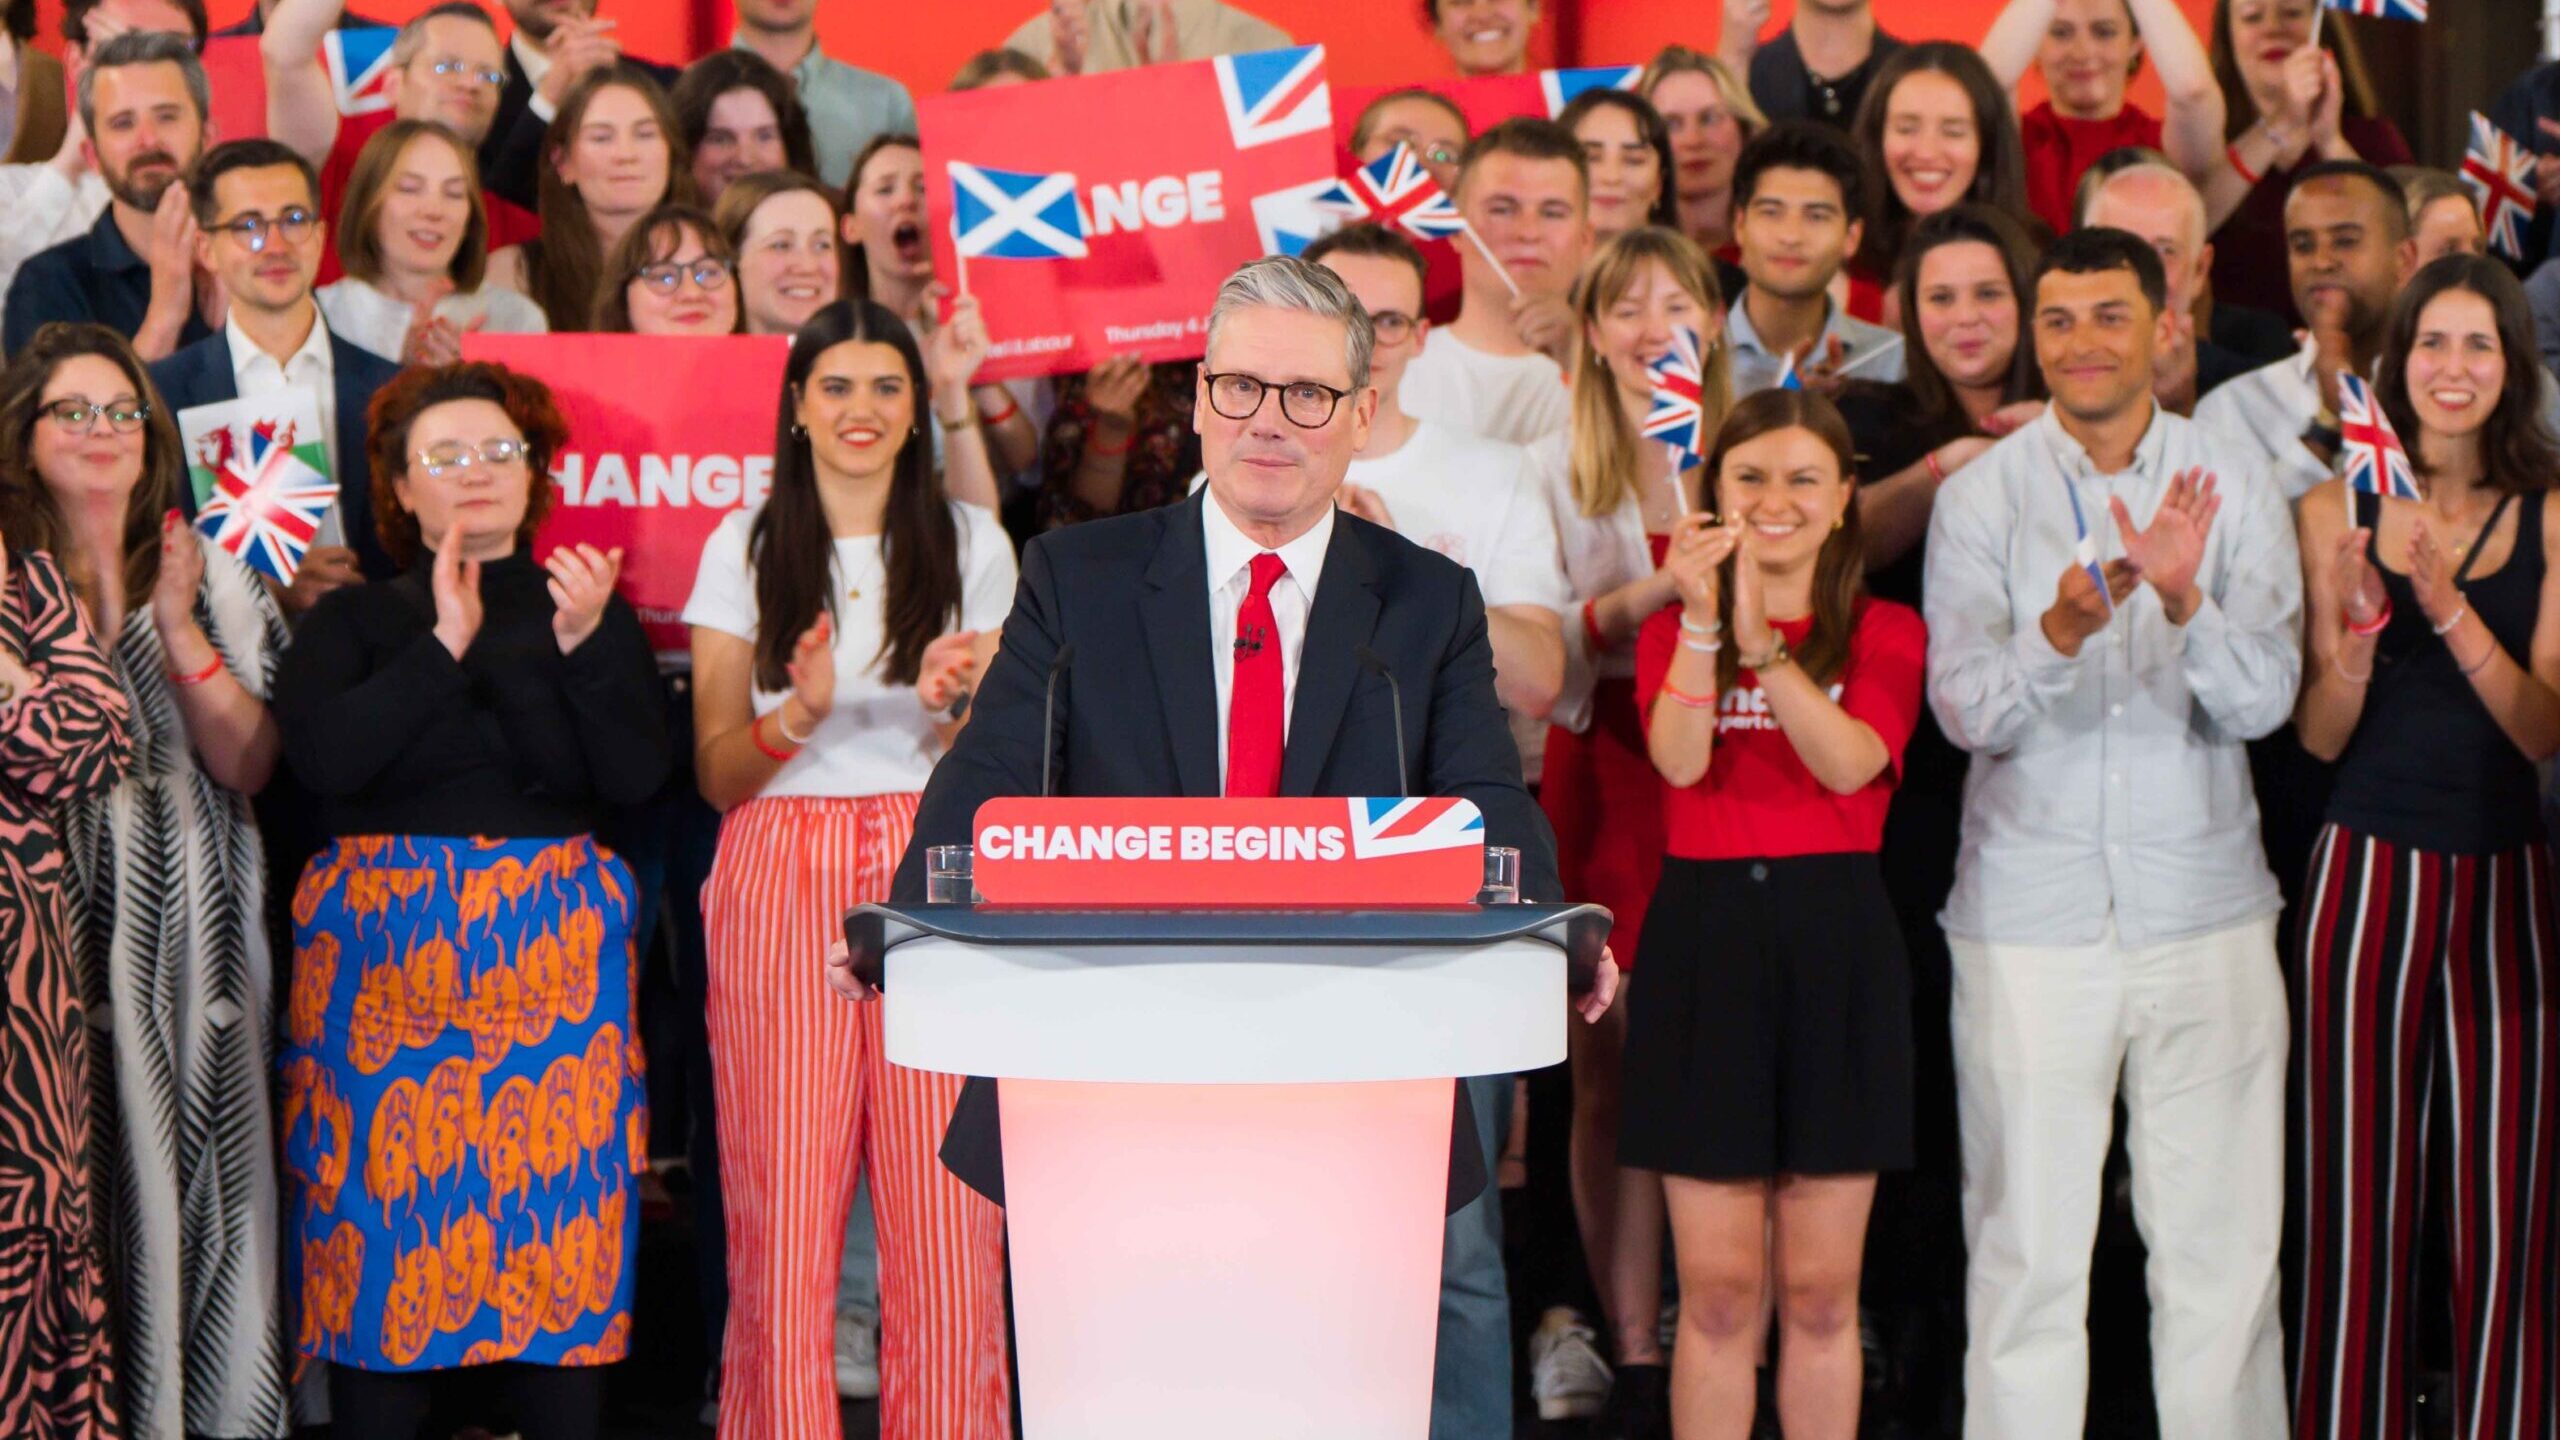 Keir Starmer at a lectern facing the camera, with supporters behind him holding placards reading 'Change', and small UK, Scottish and Welsh flags